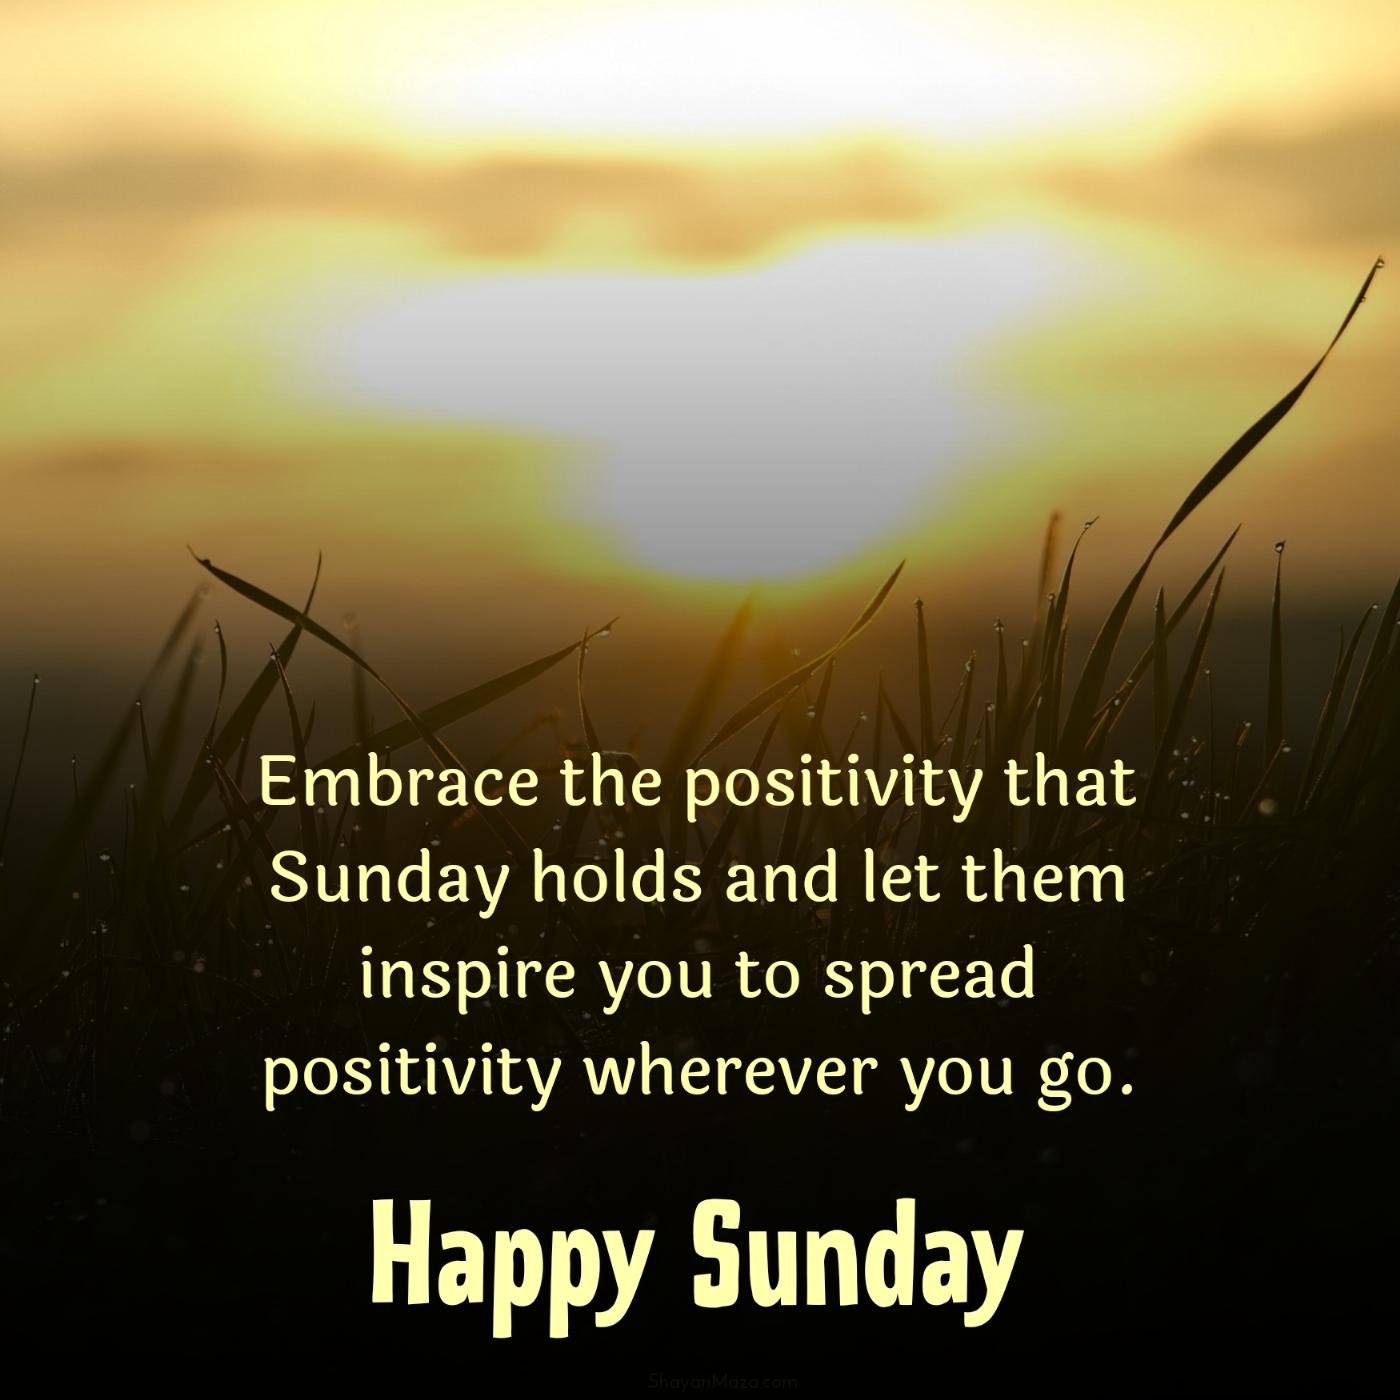 Embrace the positivity that Sunday holds and let them inspire you